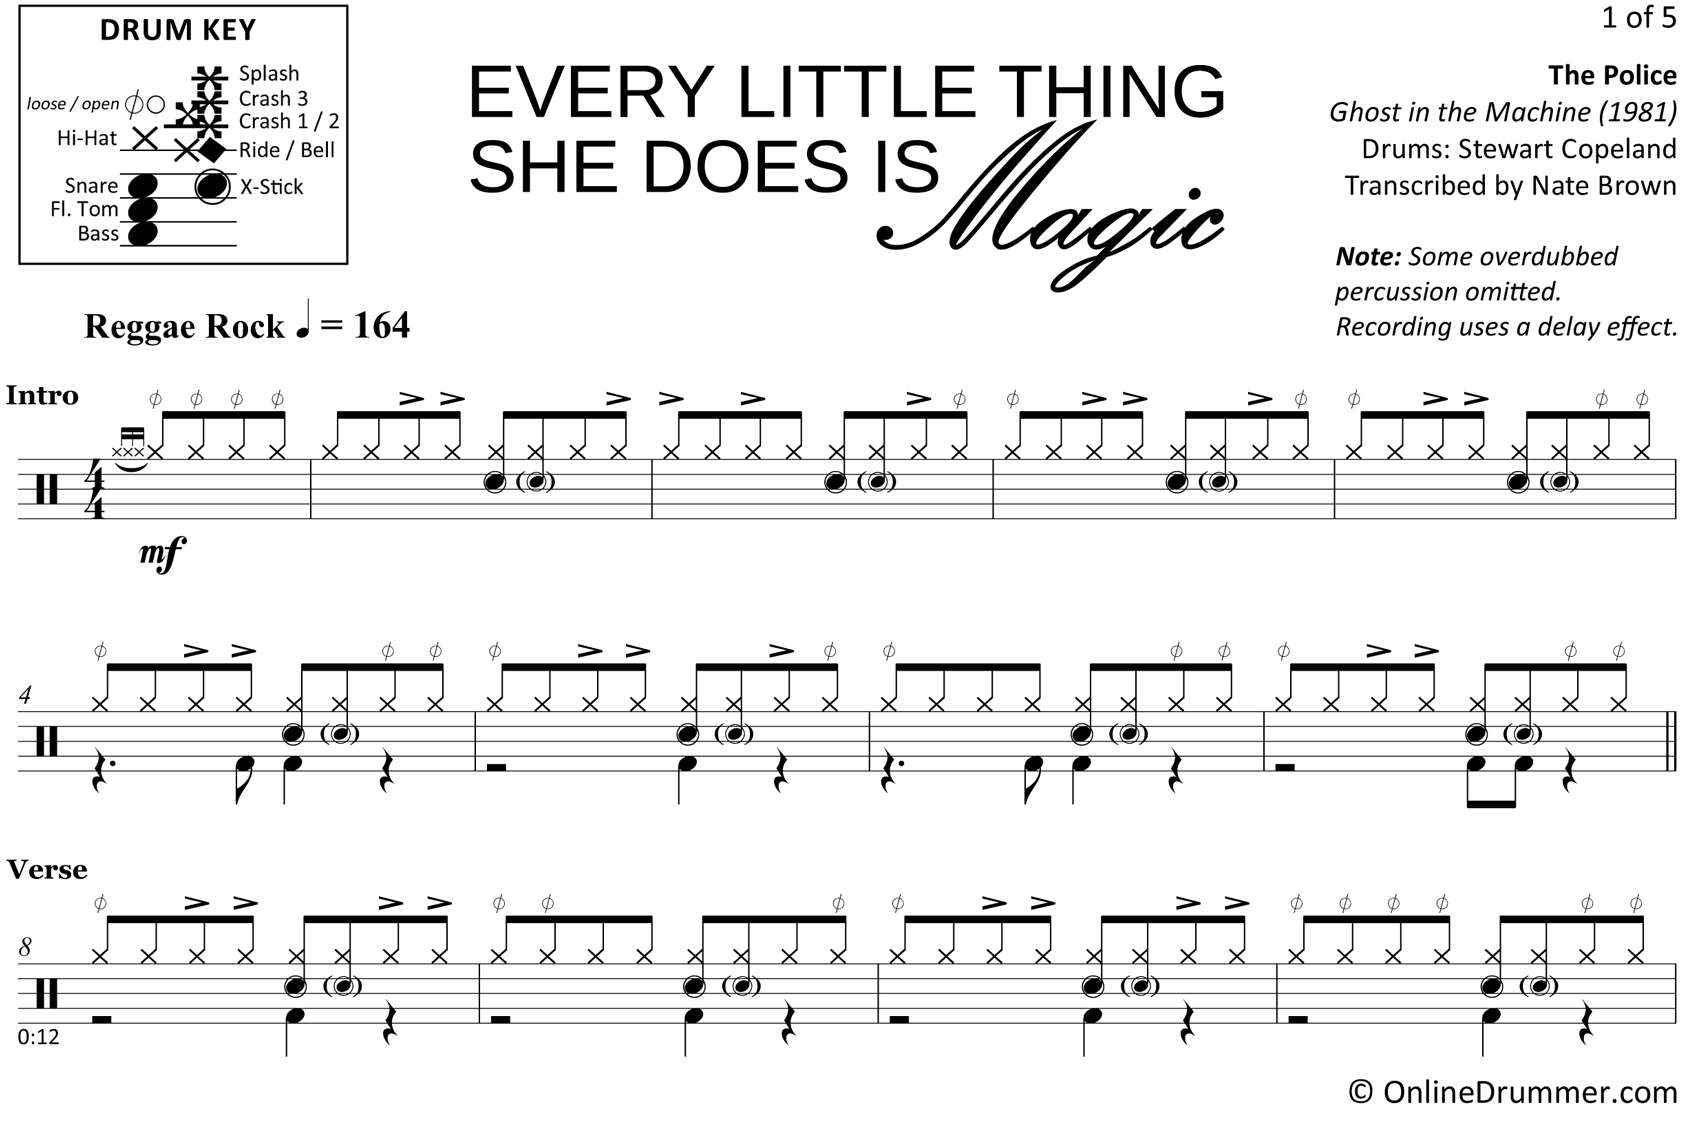 Every Little Thing She Does is Magic - The Police - Drum Sheet Music